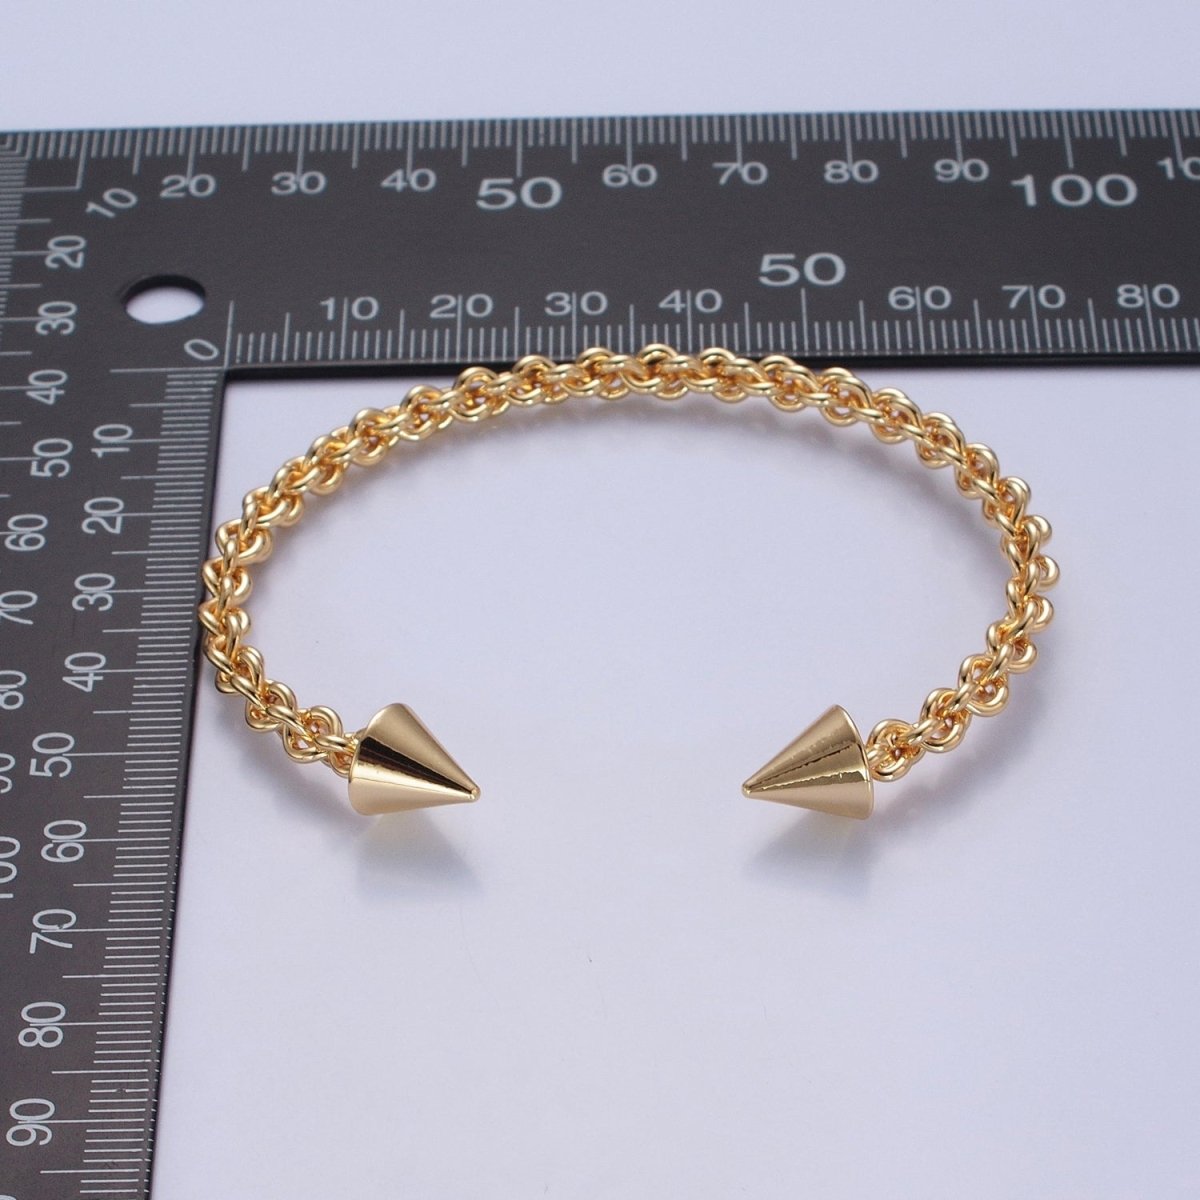 24K Gold Filled Open Rope Chain with Spike Bangle Bracelet | WA-988 WA-989 Clearance Pricing - DLUXCA